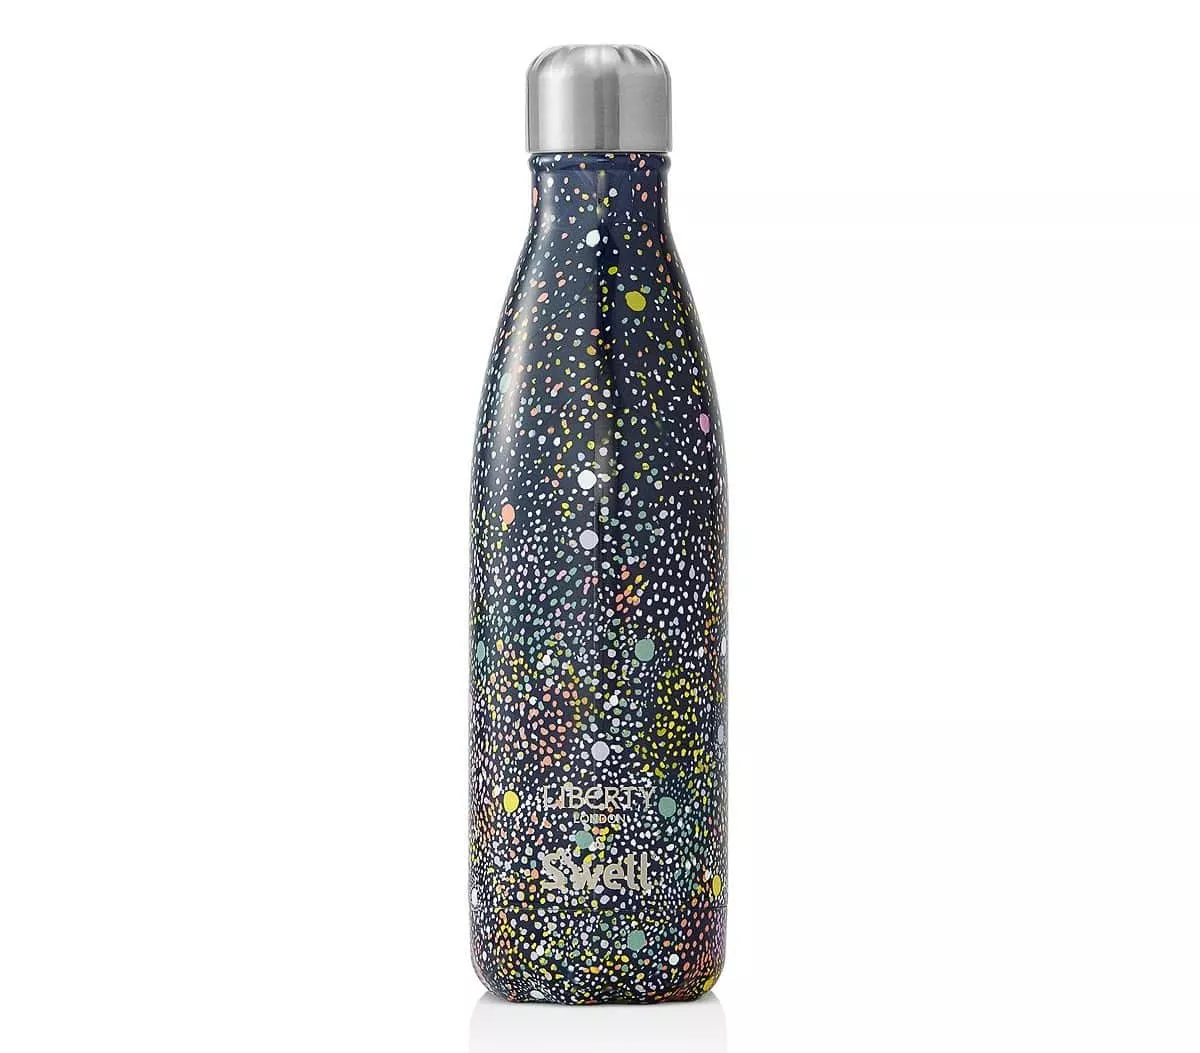 Charity Gifts That Give Back 2023: S'Well Water Bottle 2023